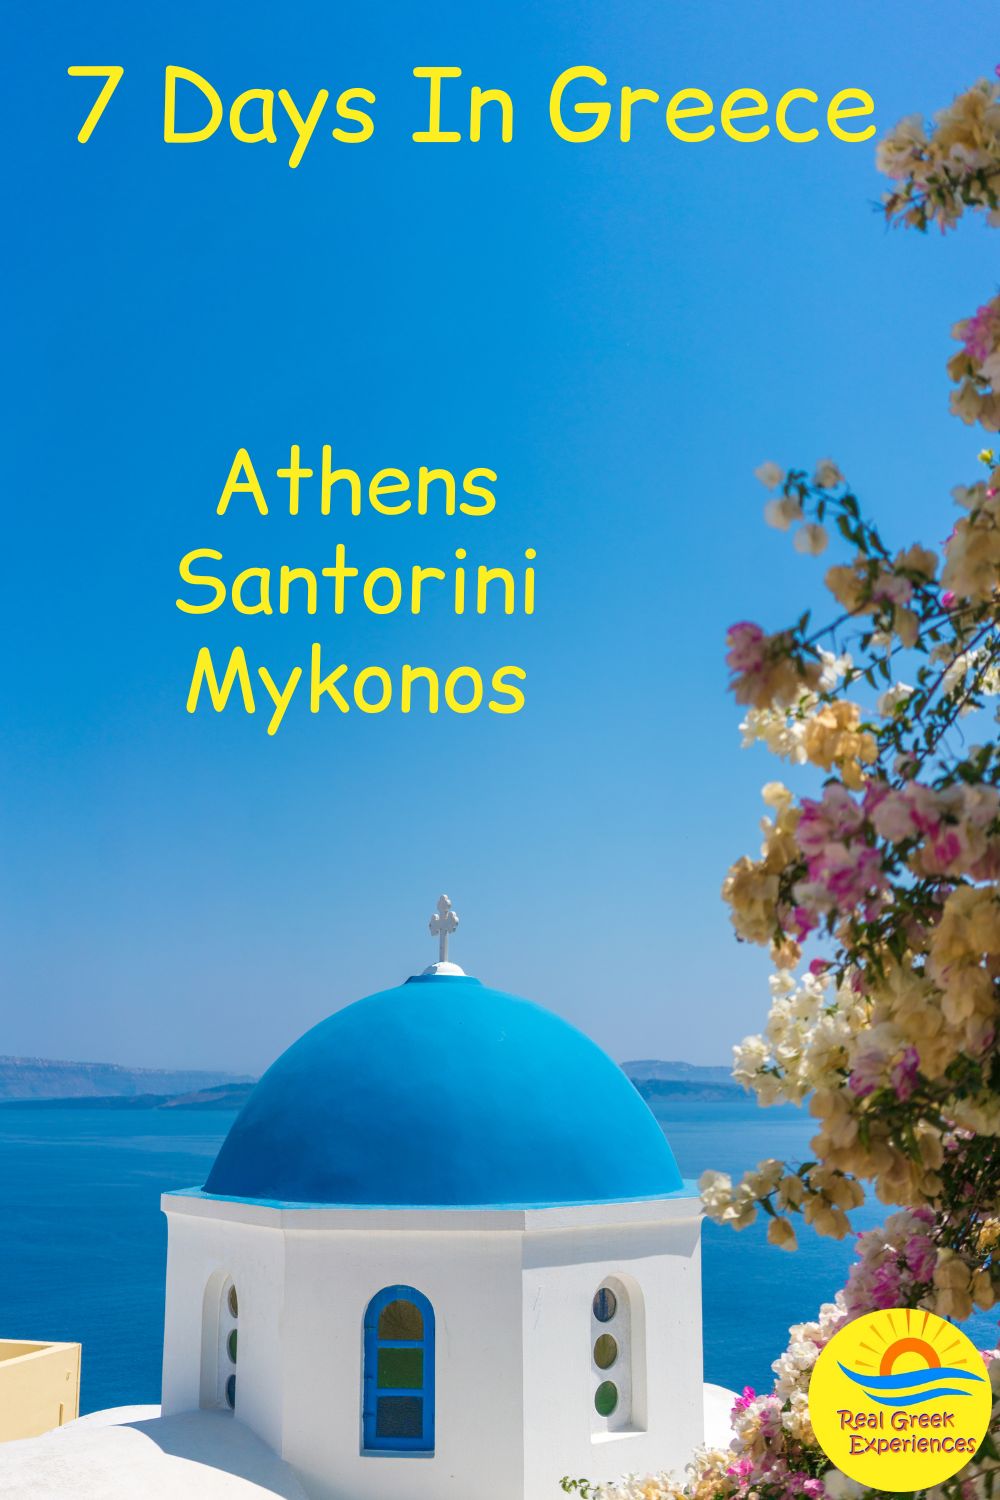 Athens Mykonos and Santorini in 7 days in Greece